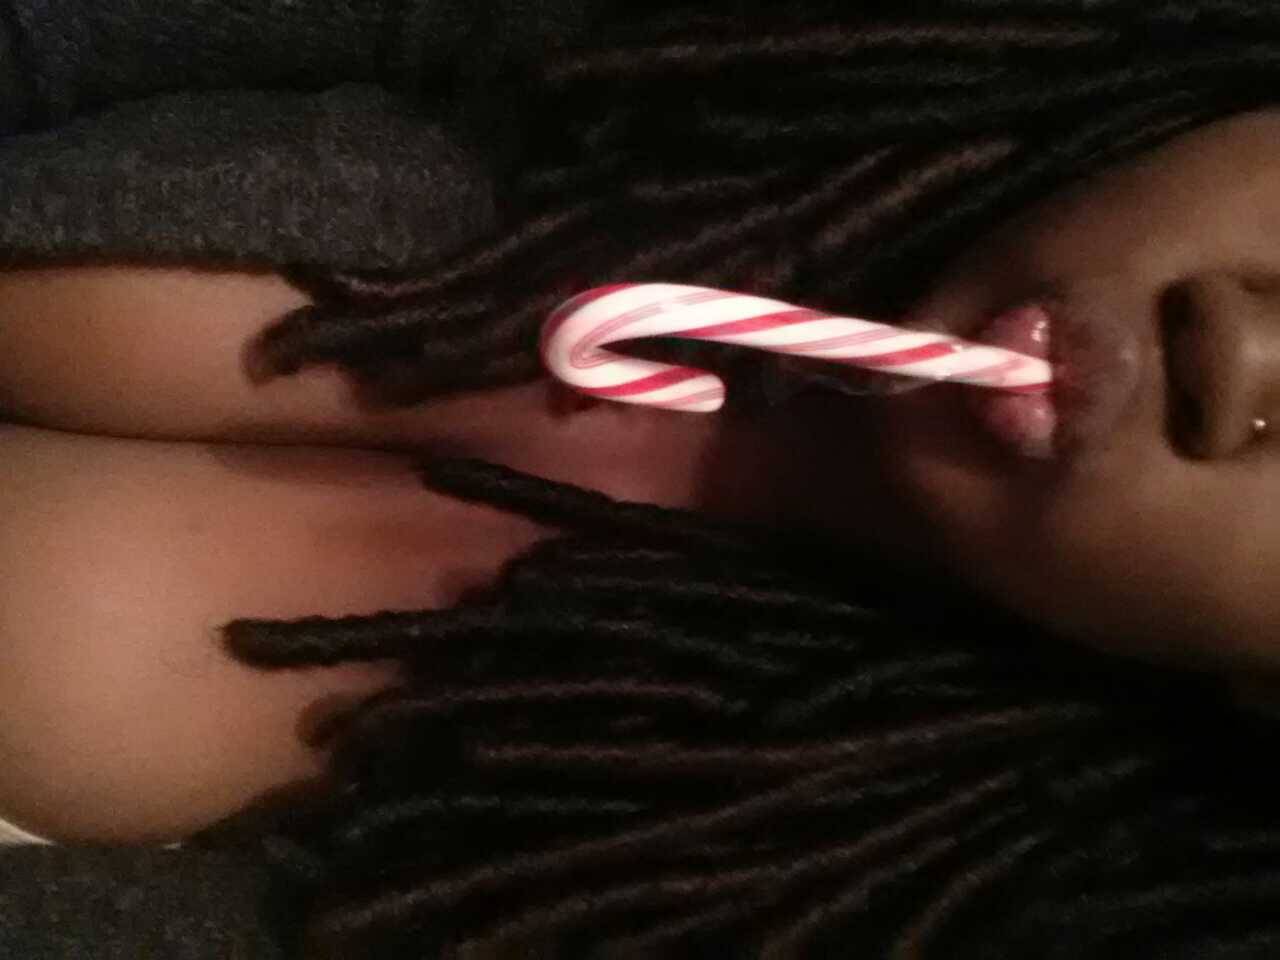 little-sub-123:  Candy cane selfie yay!